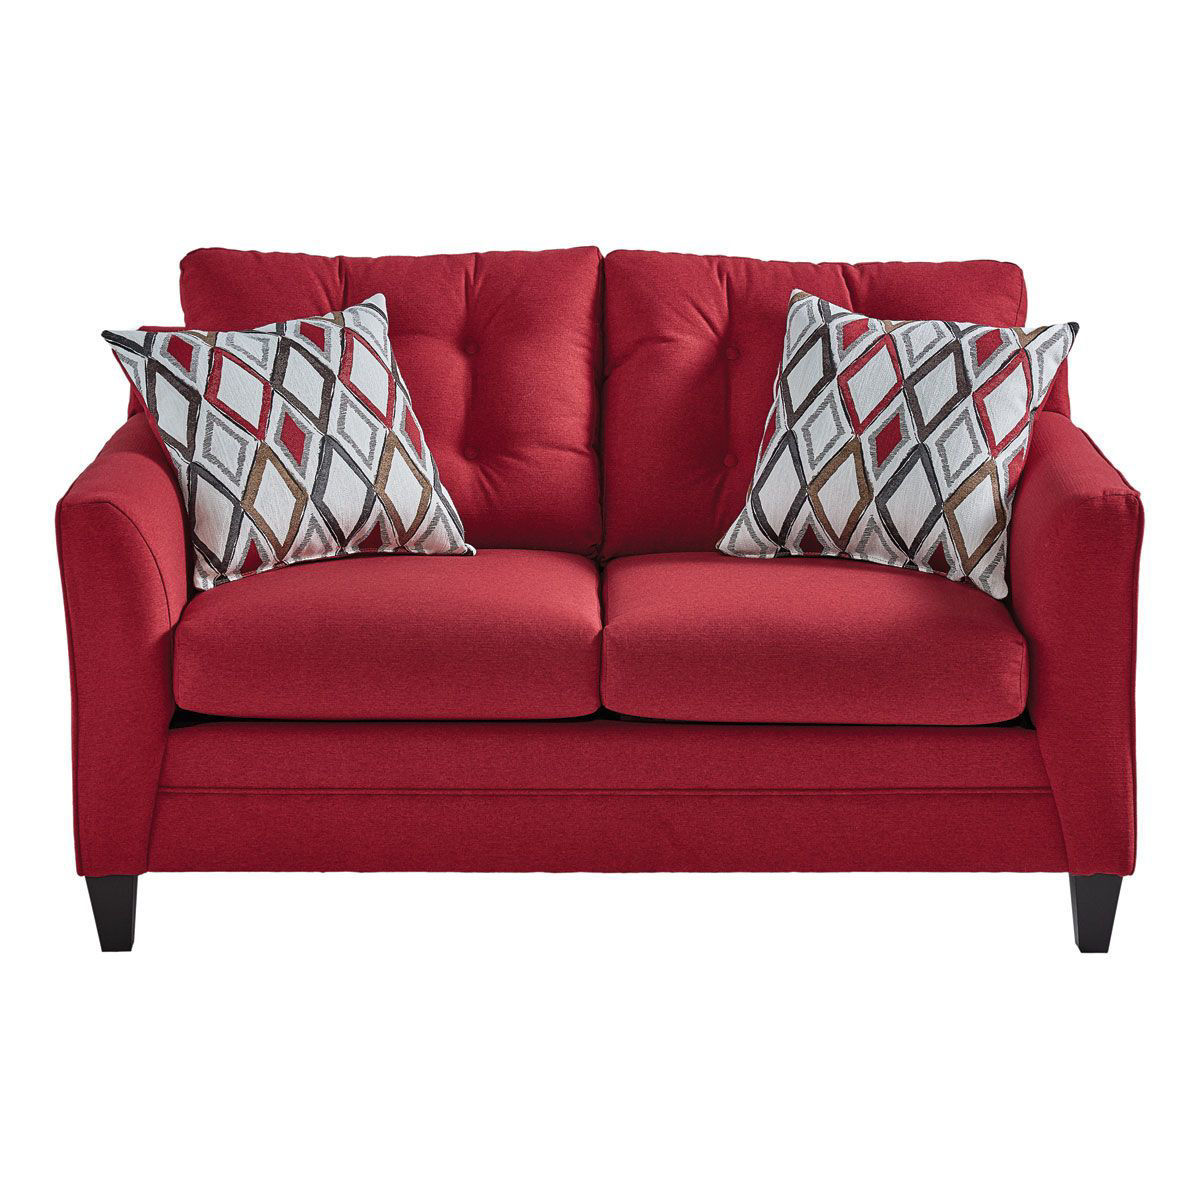 Picture of HALEY RED LOVESEAT